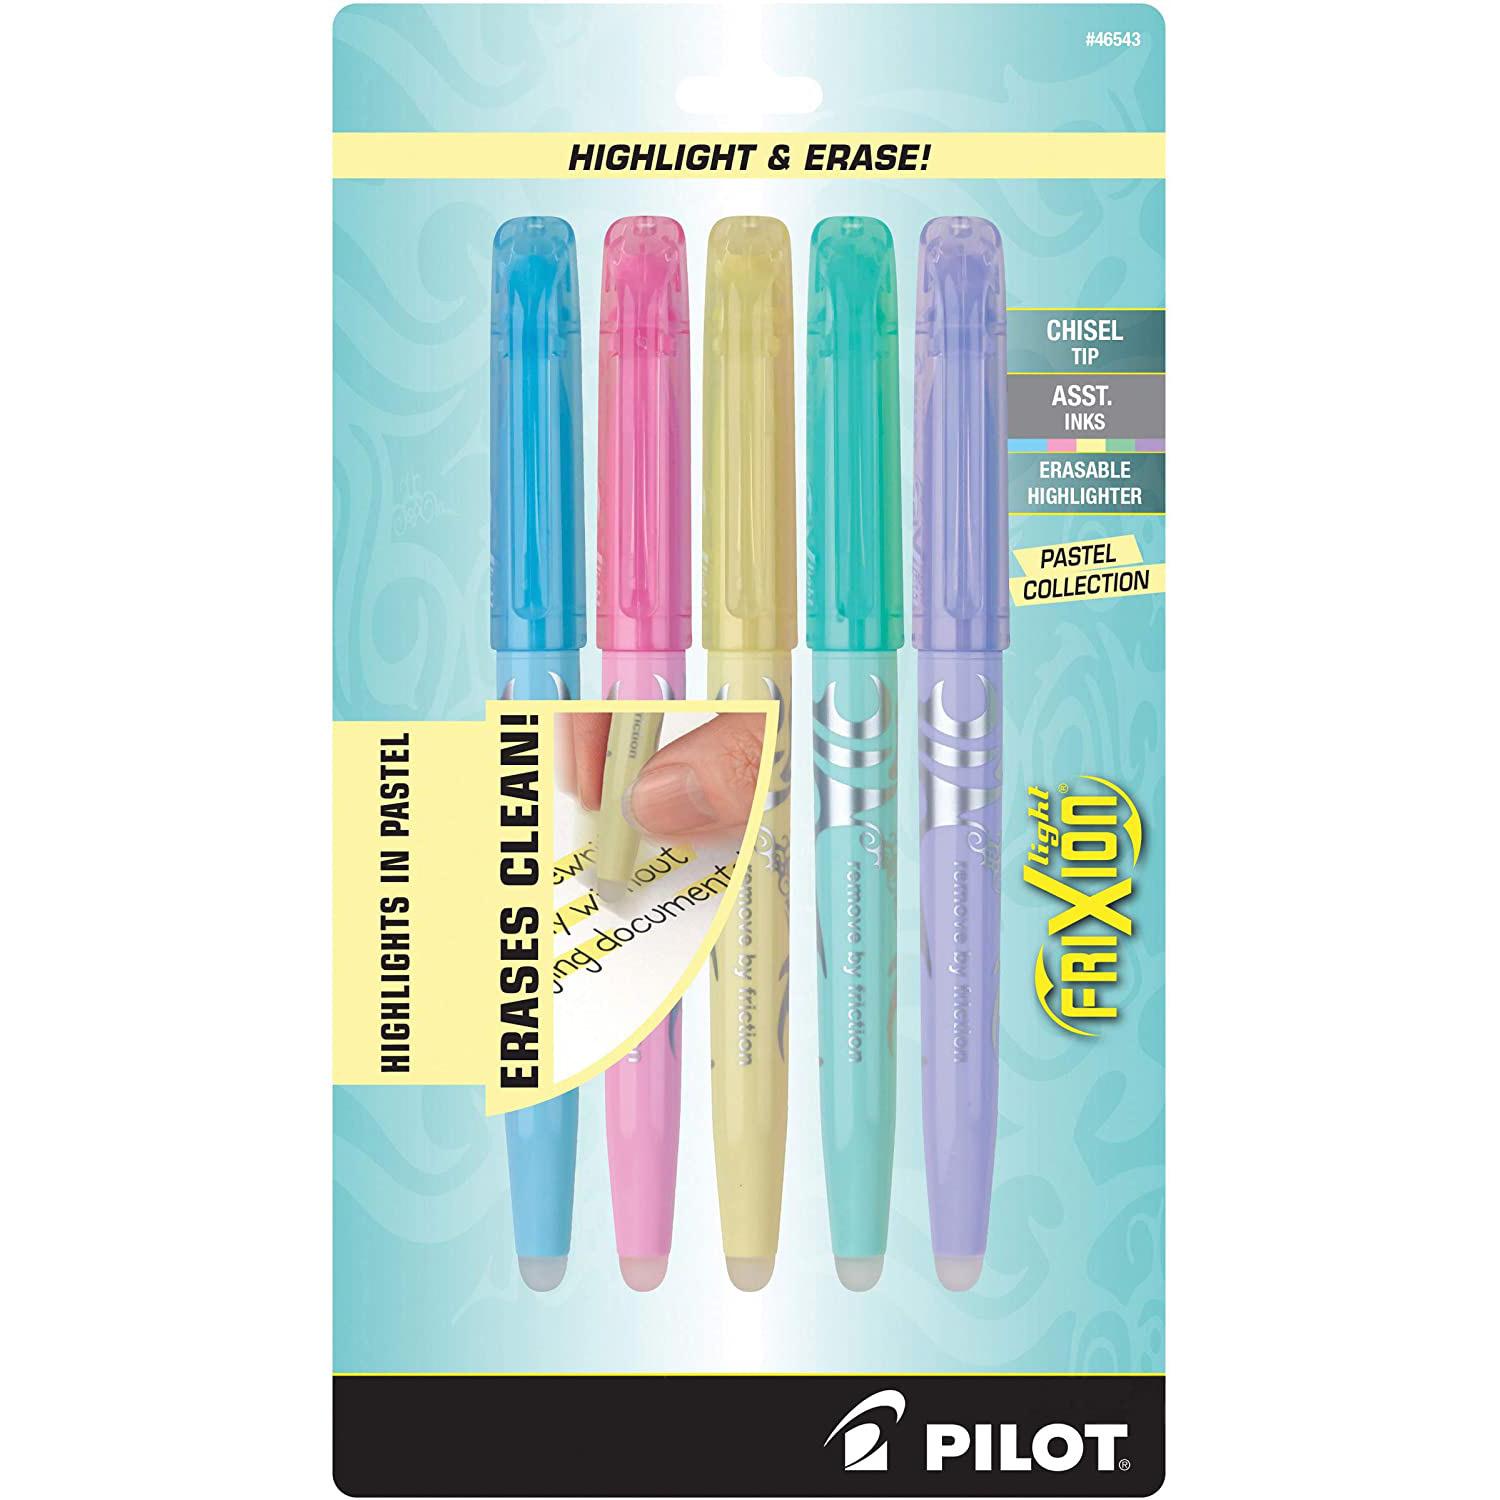 5 Pilot FriXion Light Pastel Collection Erasable Highlighters for $3.99